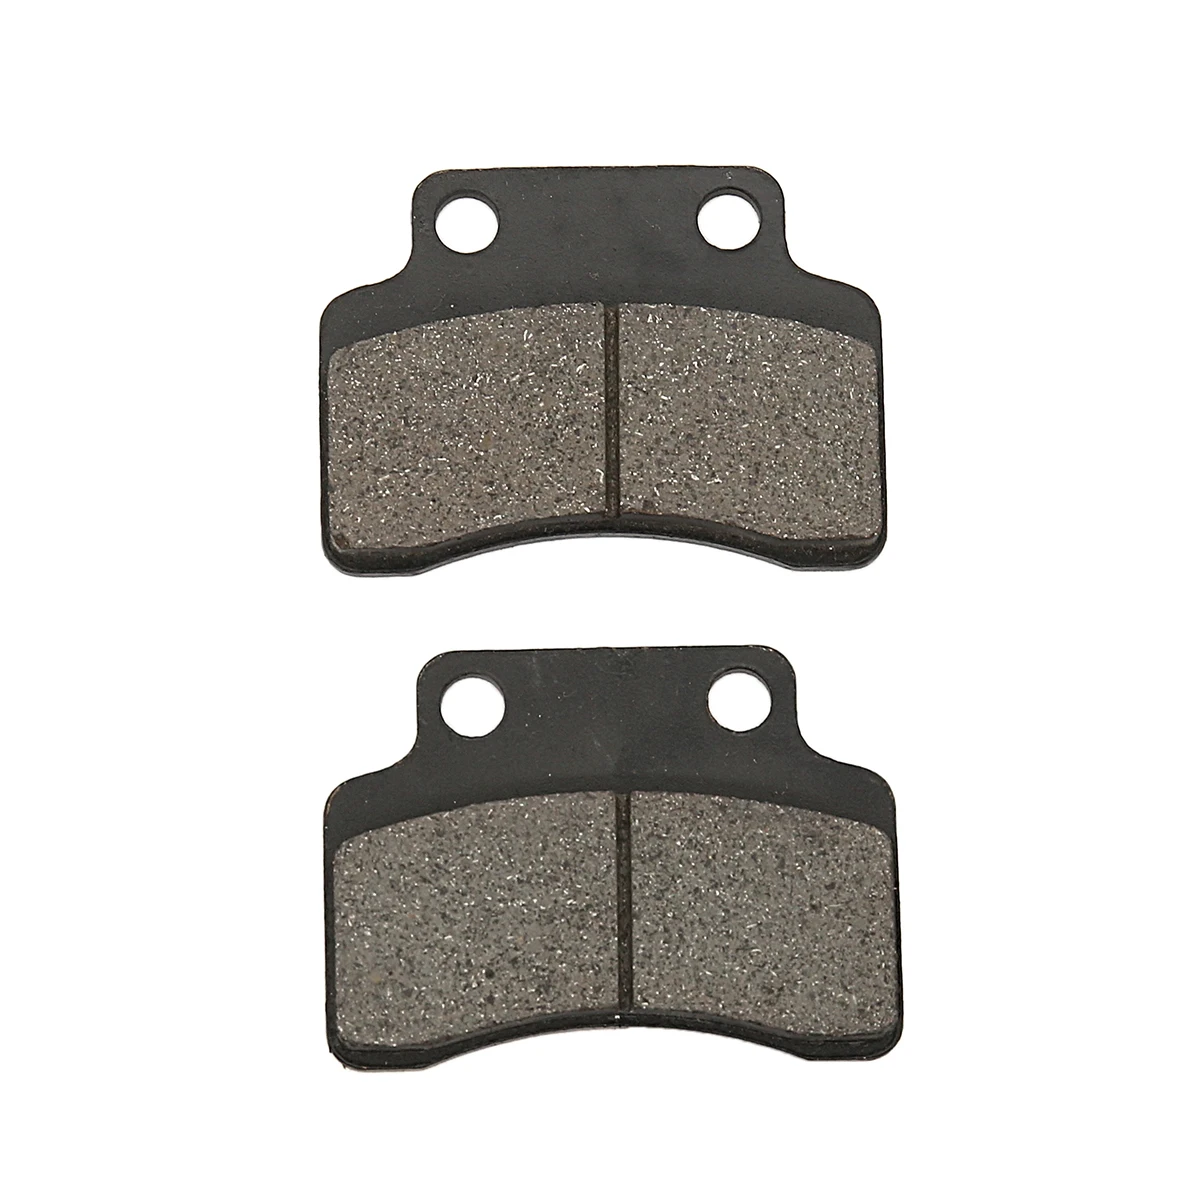 

Motorcycle Front Brake Pads For BENELLI 49X-Scooter 2007 CPI Oliver Hussar Popcorn 50 2003 2004 2005